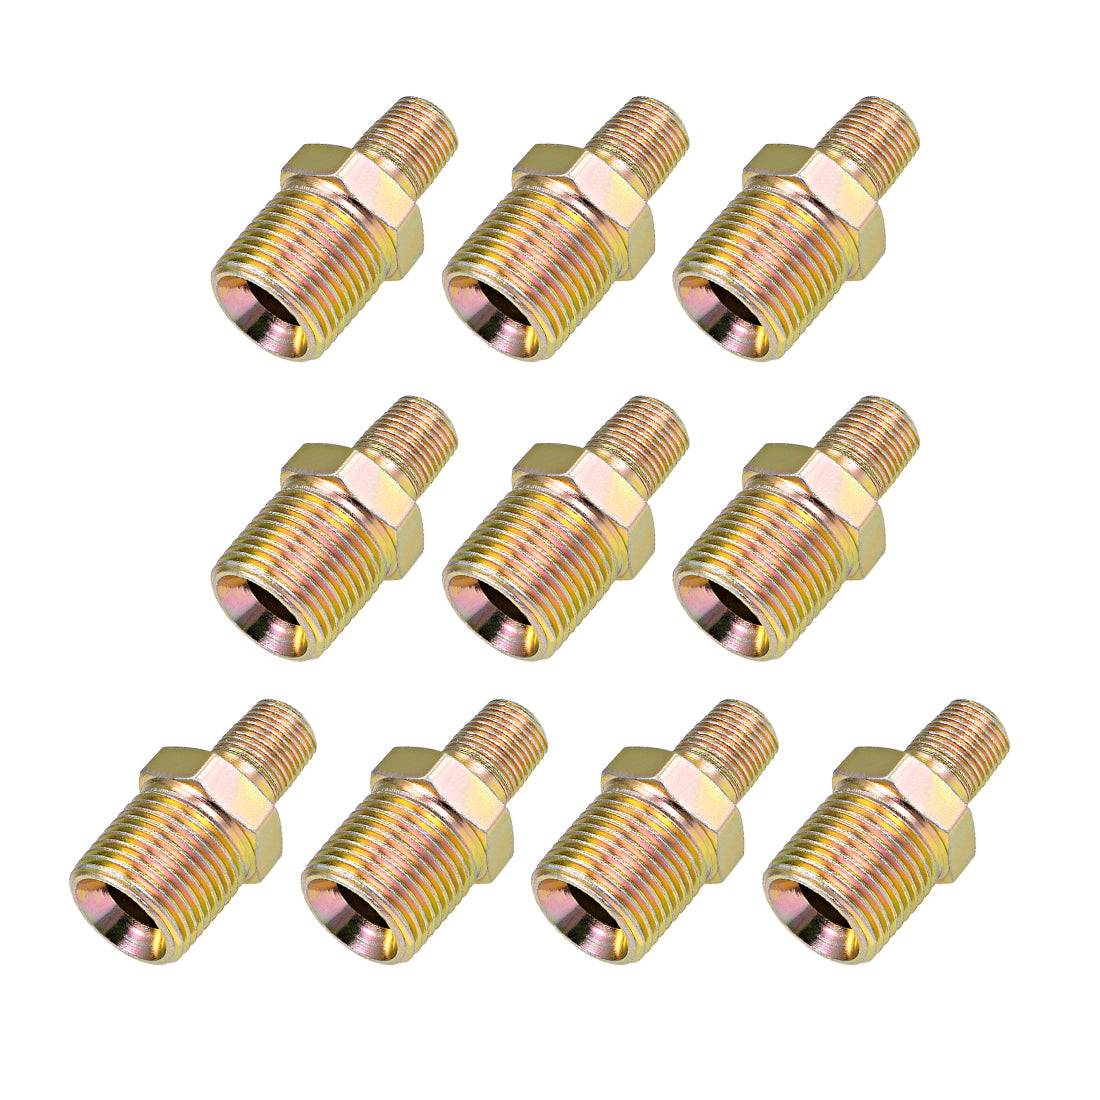 Uxcell Uxcell Reducing Pipe Fitting Reducer Hex 1/8 NPT x 1/4 BSP Male 10Pcs